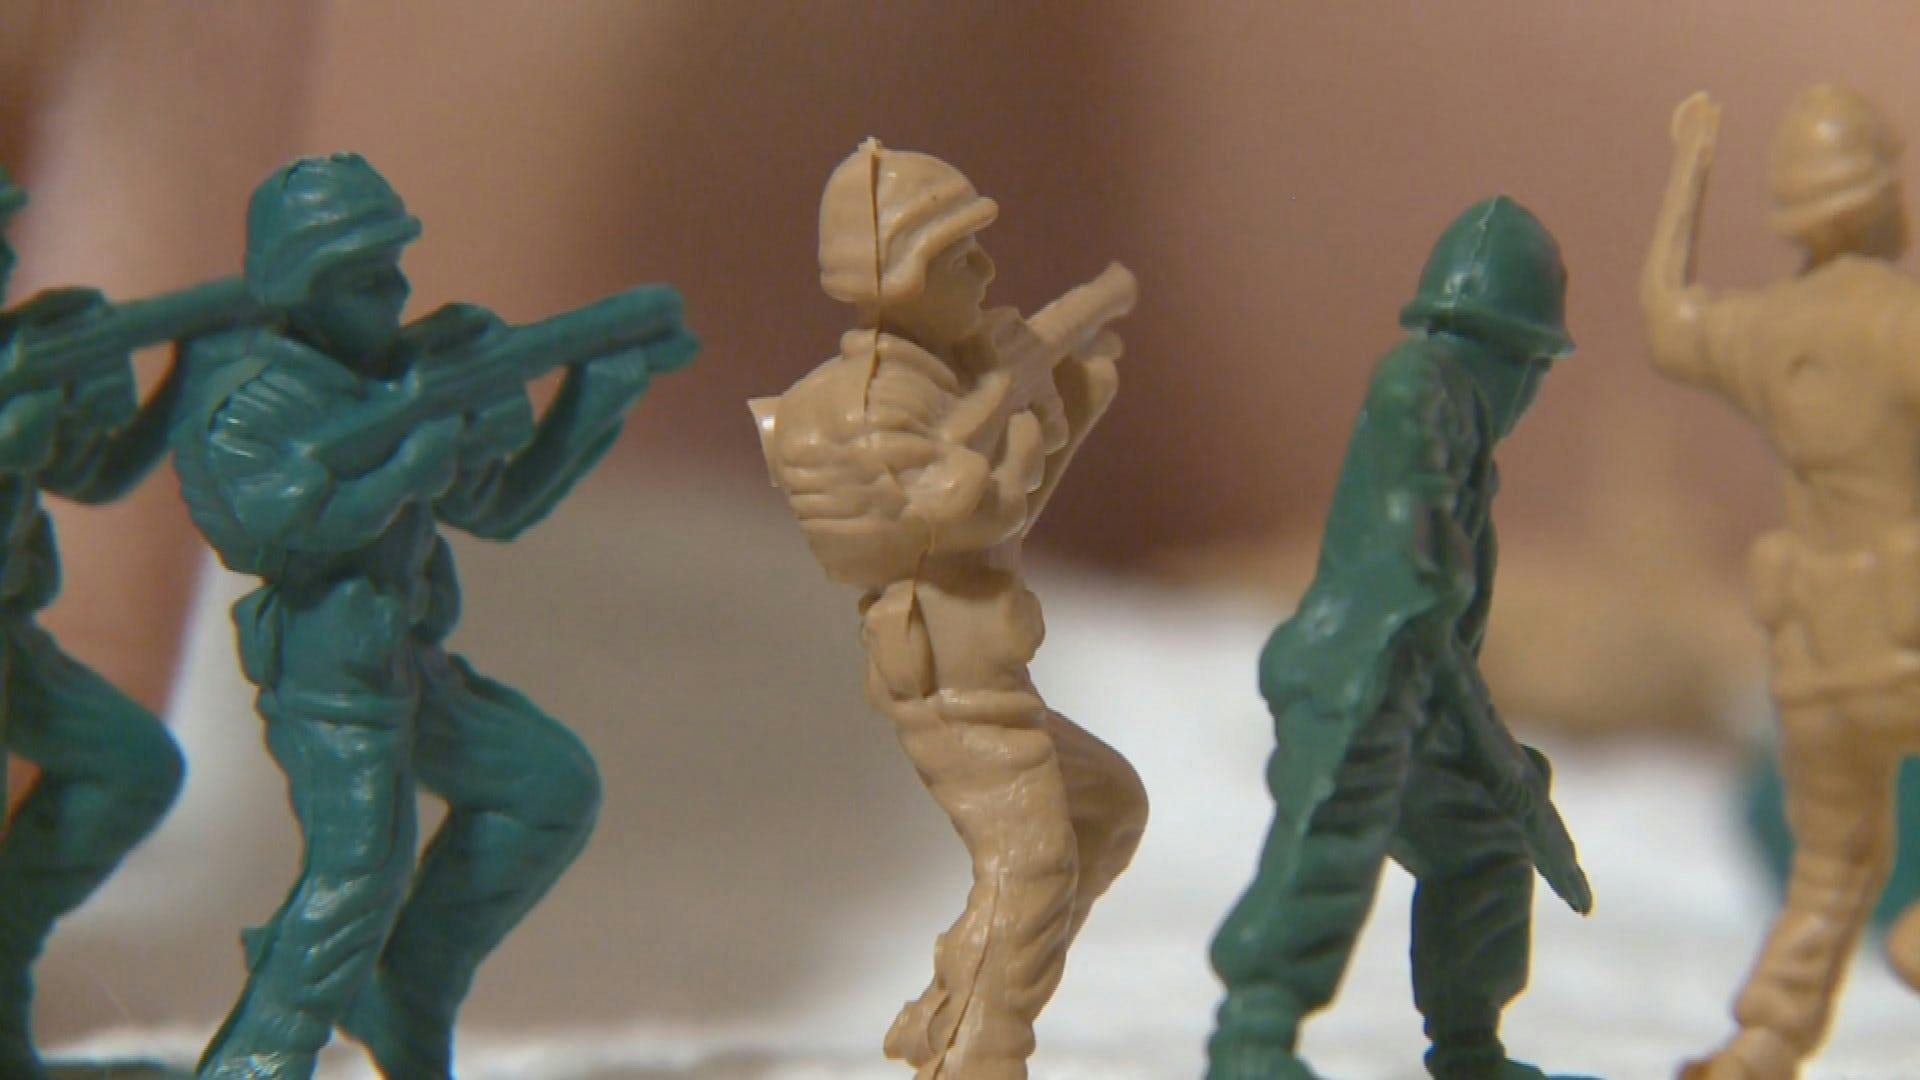 small army figures